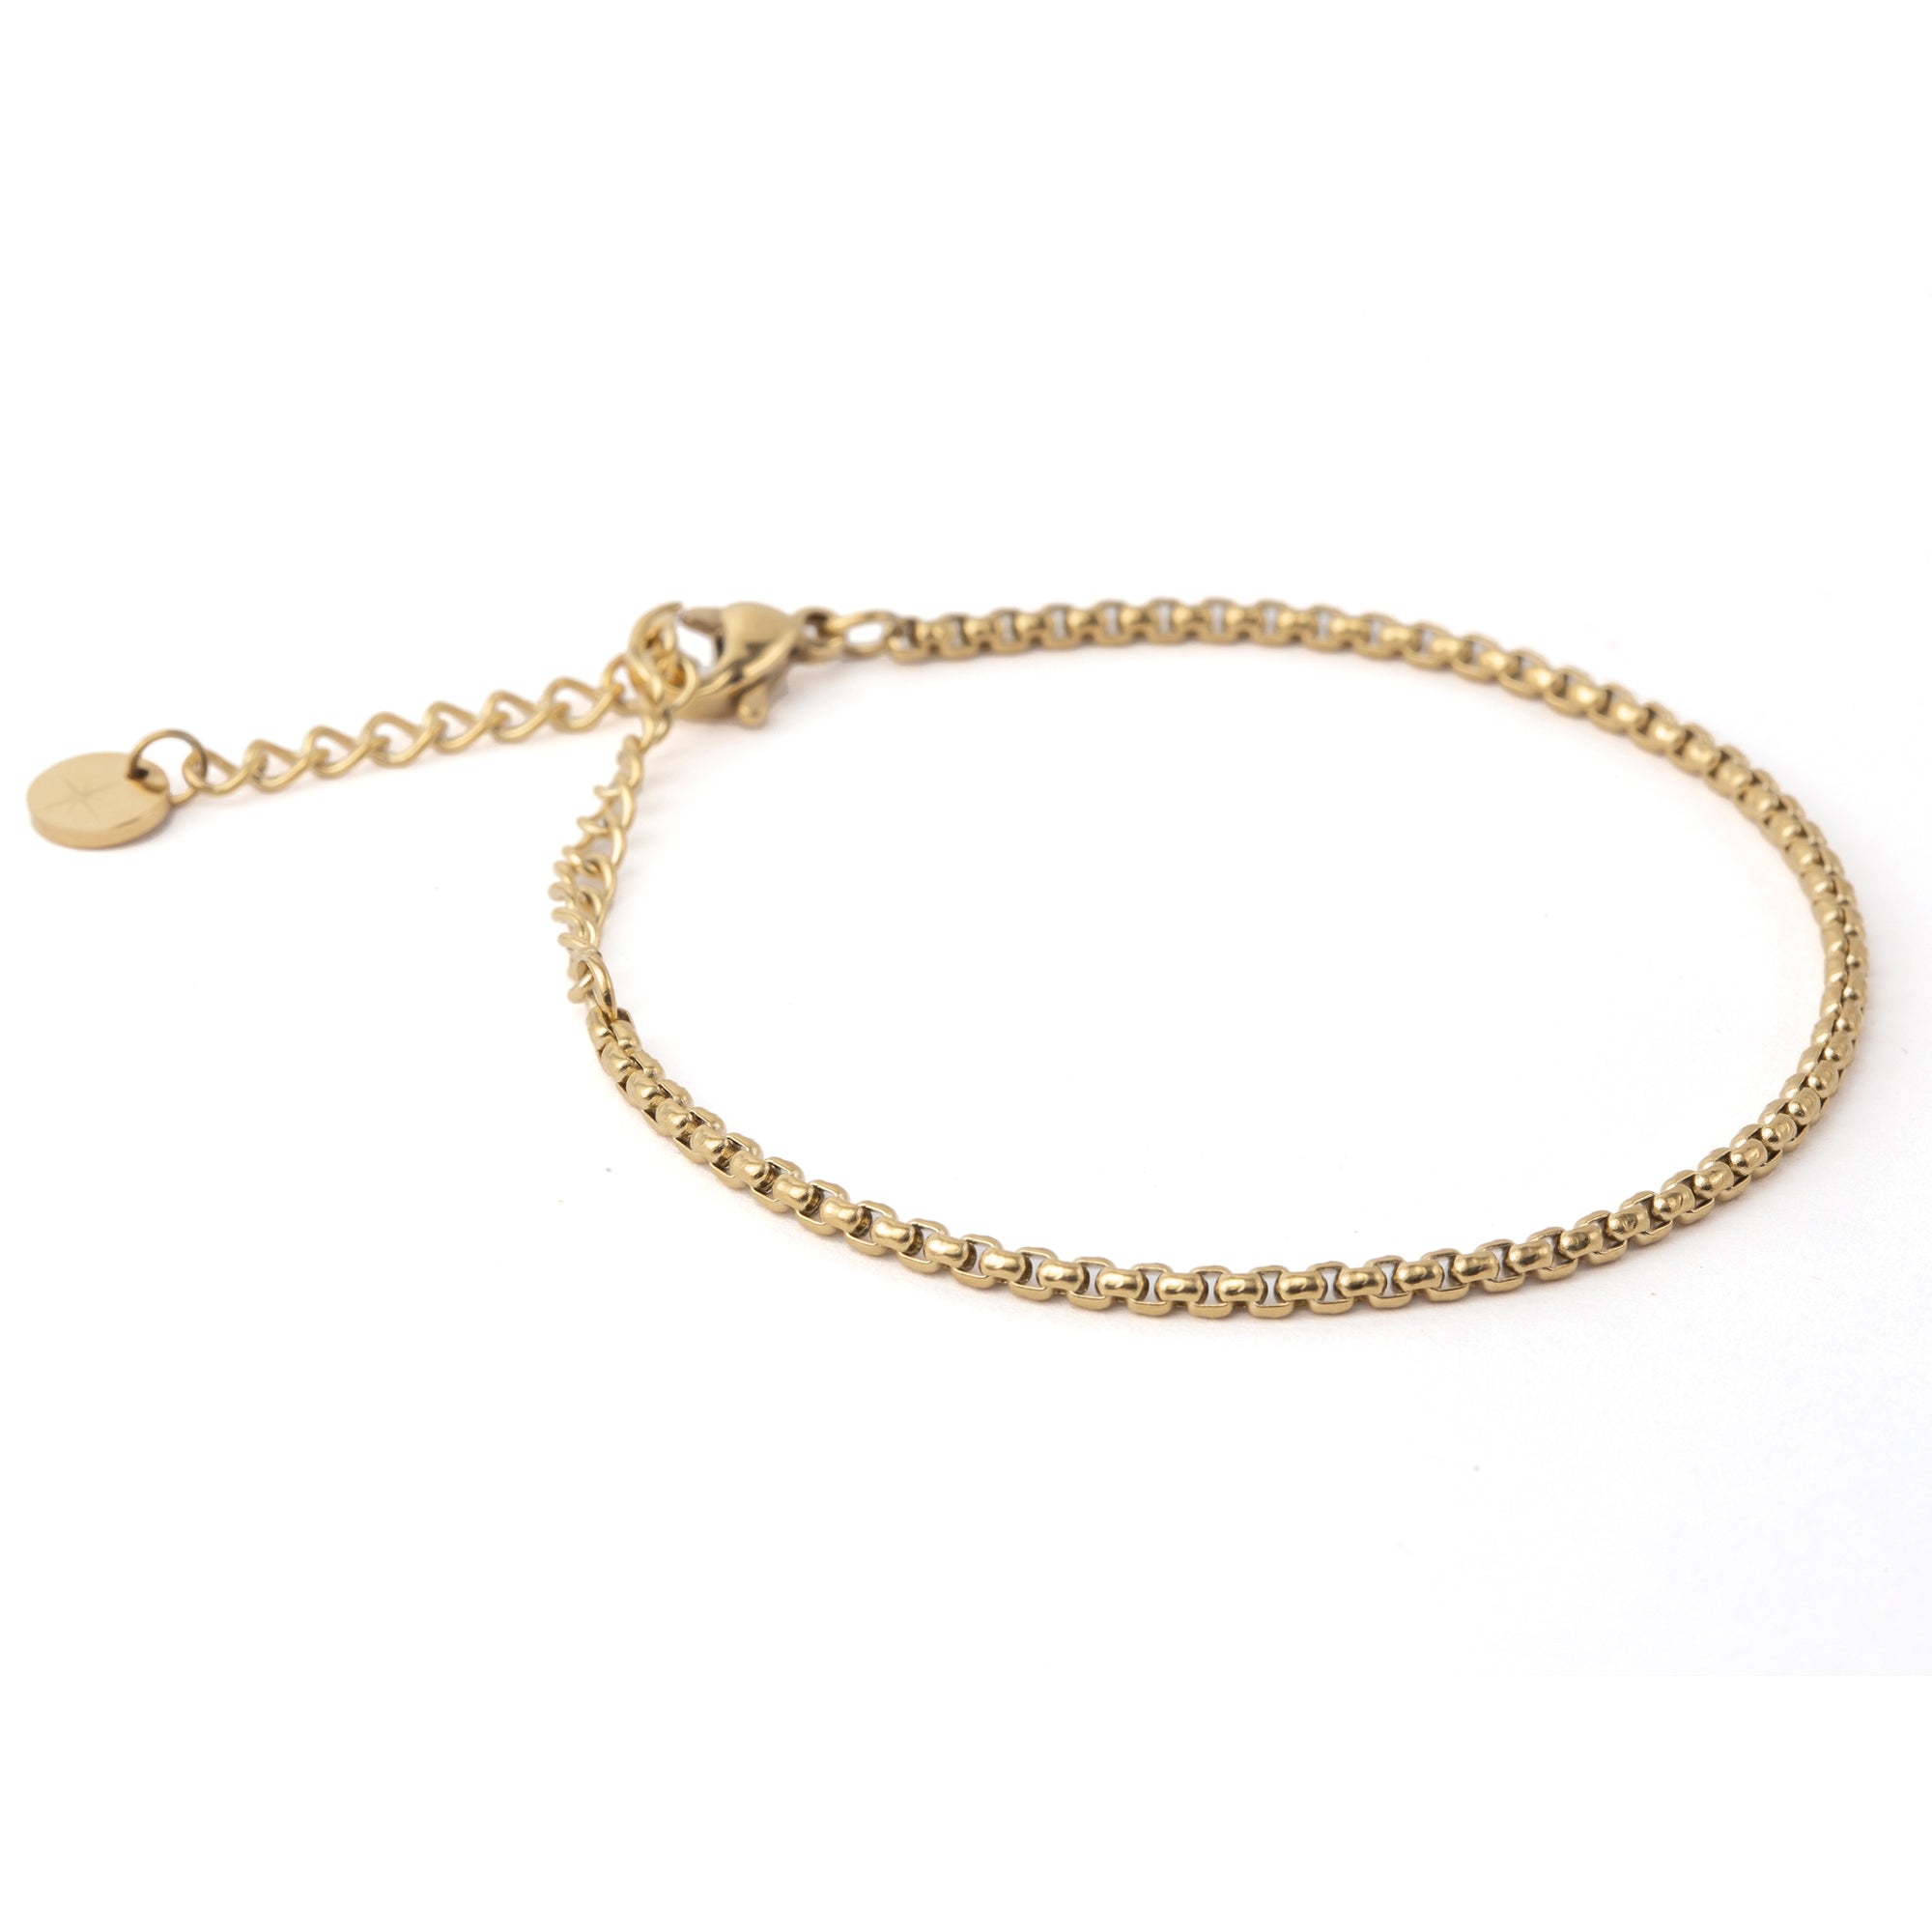 The Lily Box Chain BraceletBy Rae Jewellery